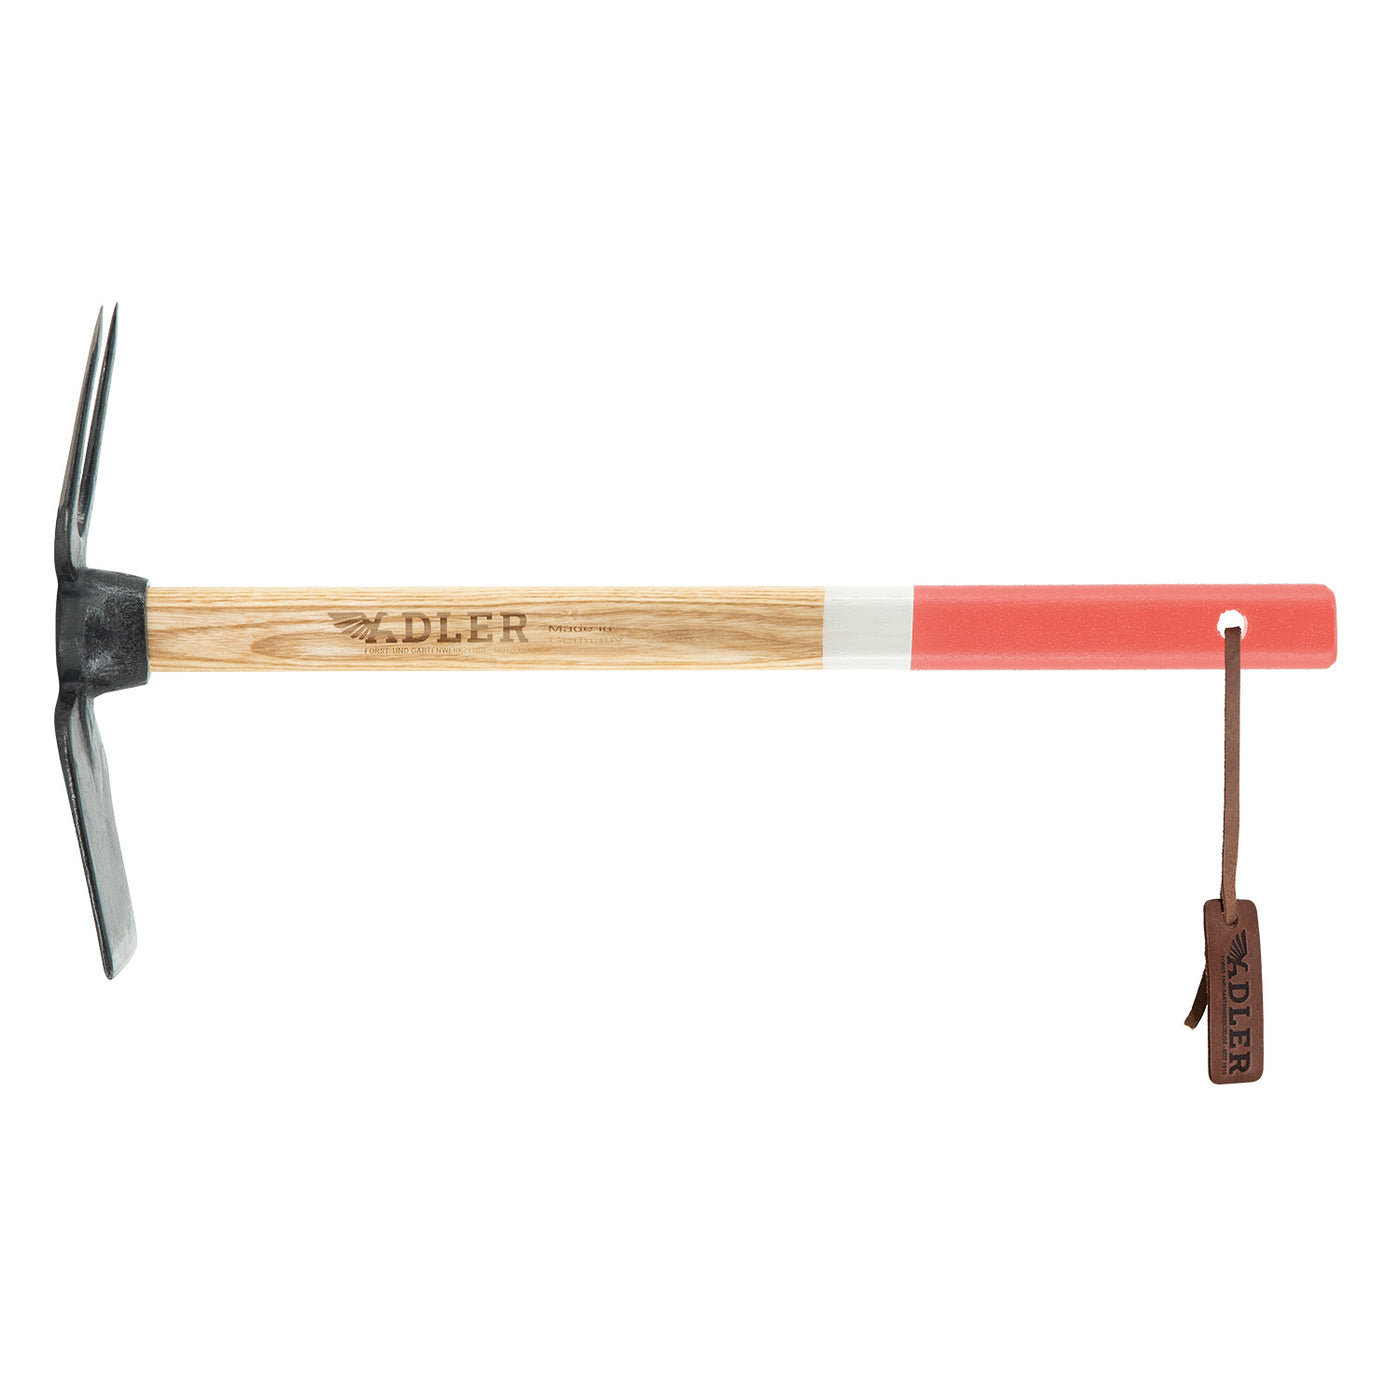 Garden Hoe “Lily” with 2 prongs